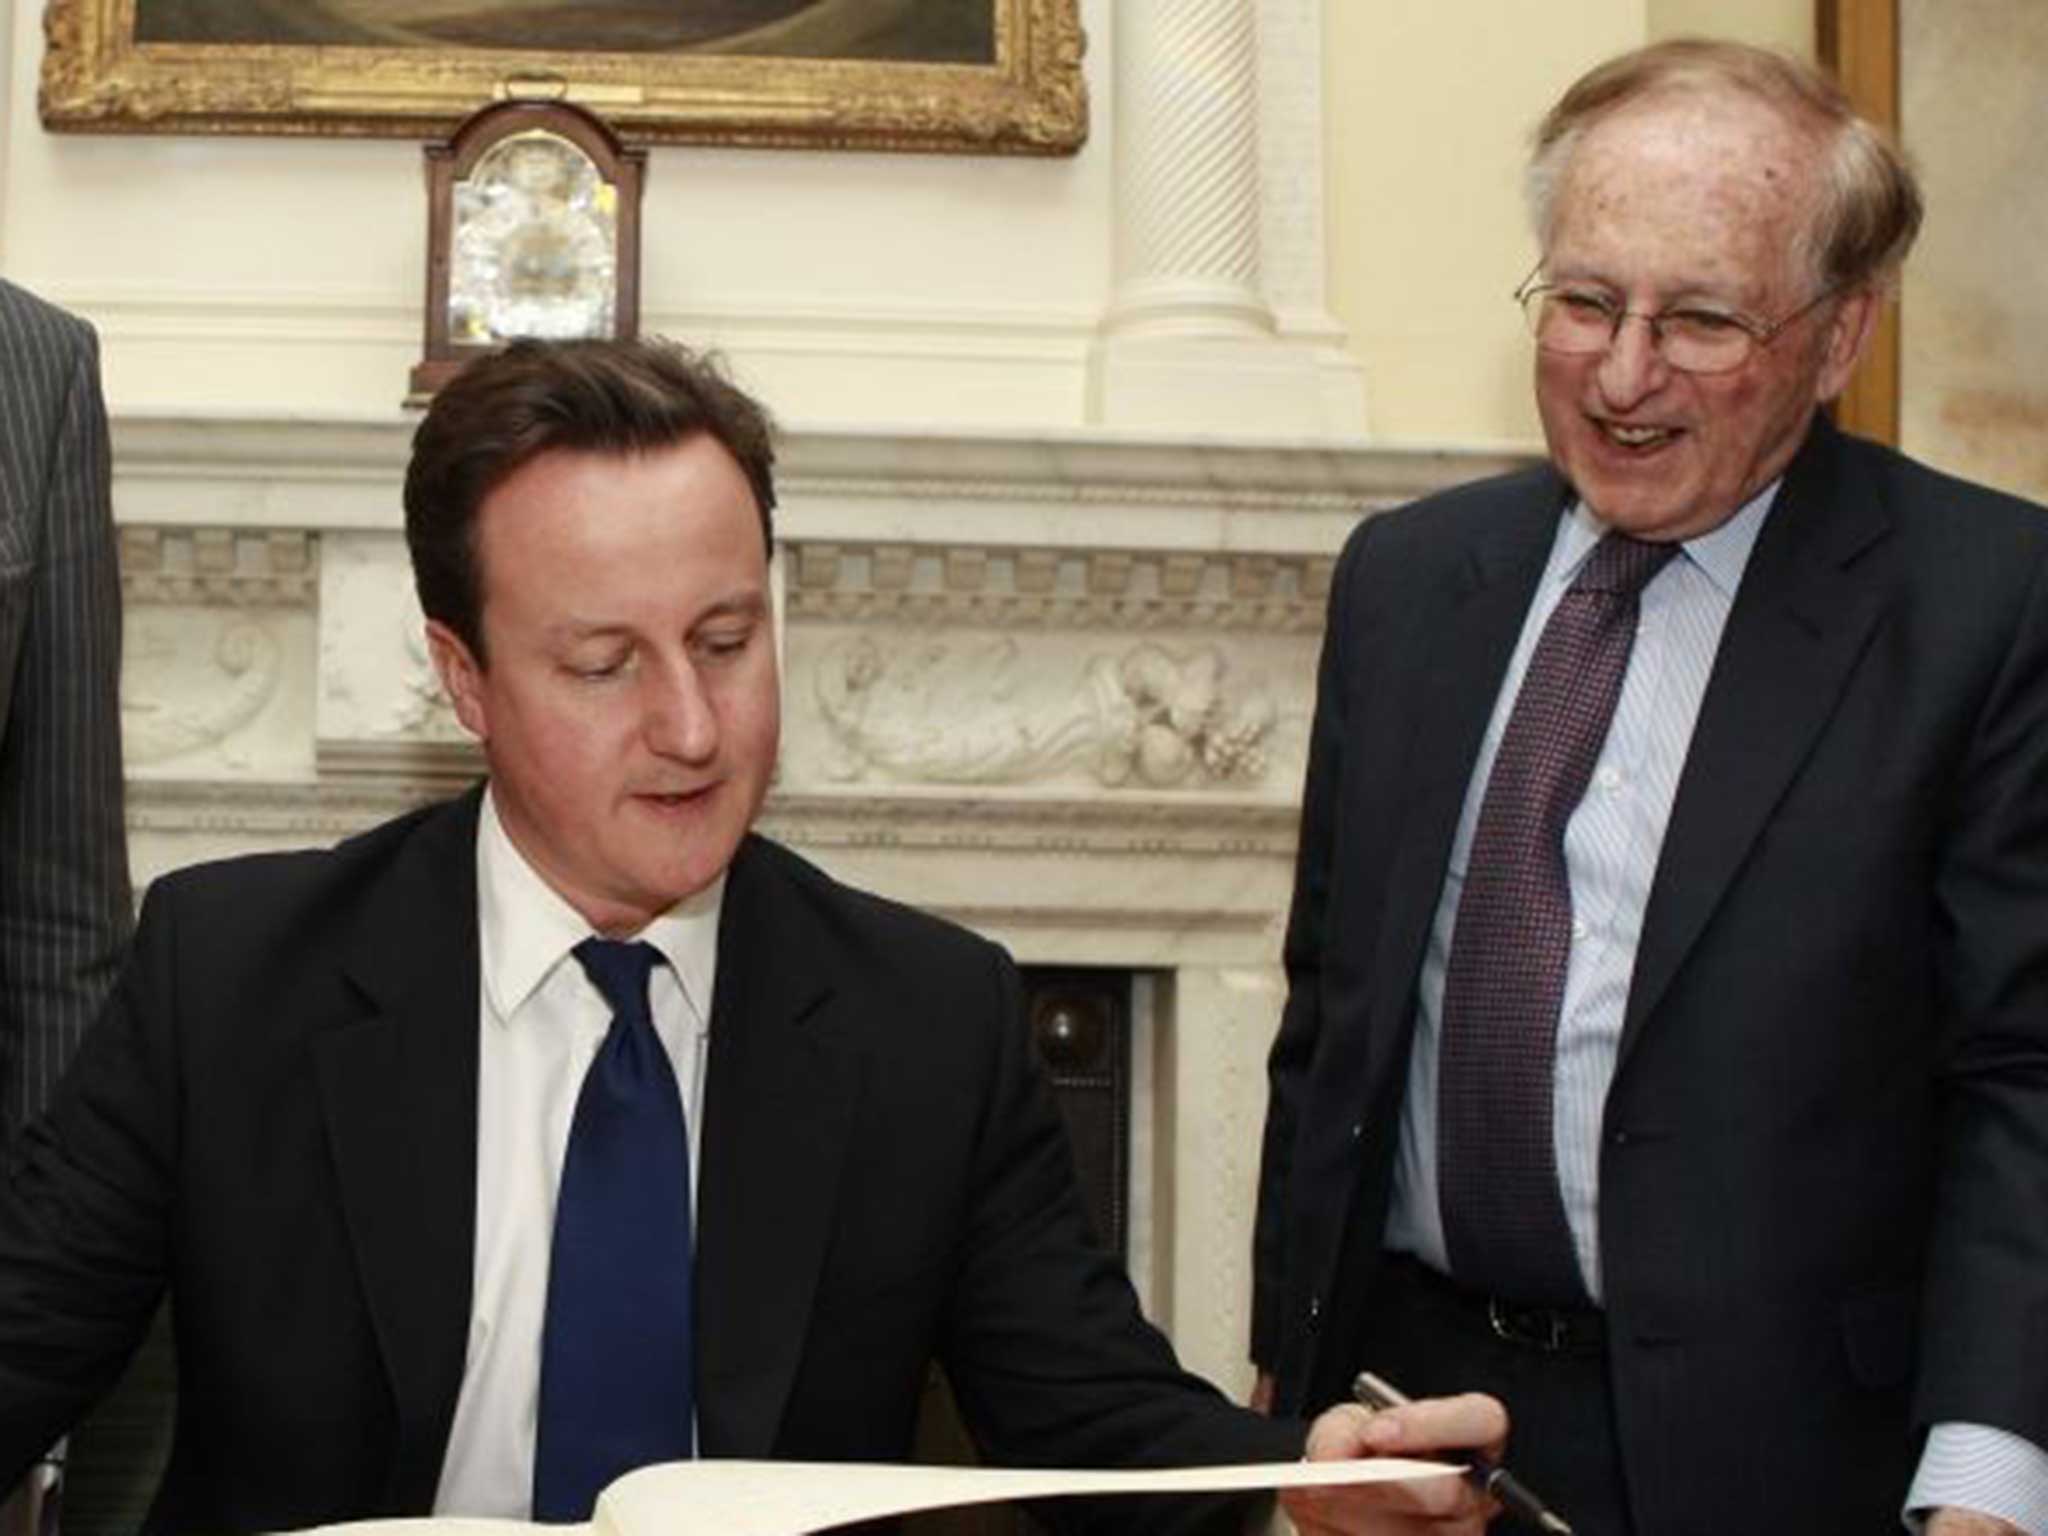 Lord Janner was chairman of the Holocaust Educational Trust and campaigned for justice for the victims of Nazism